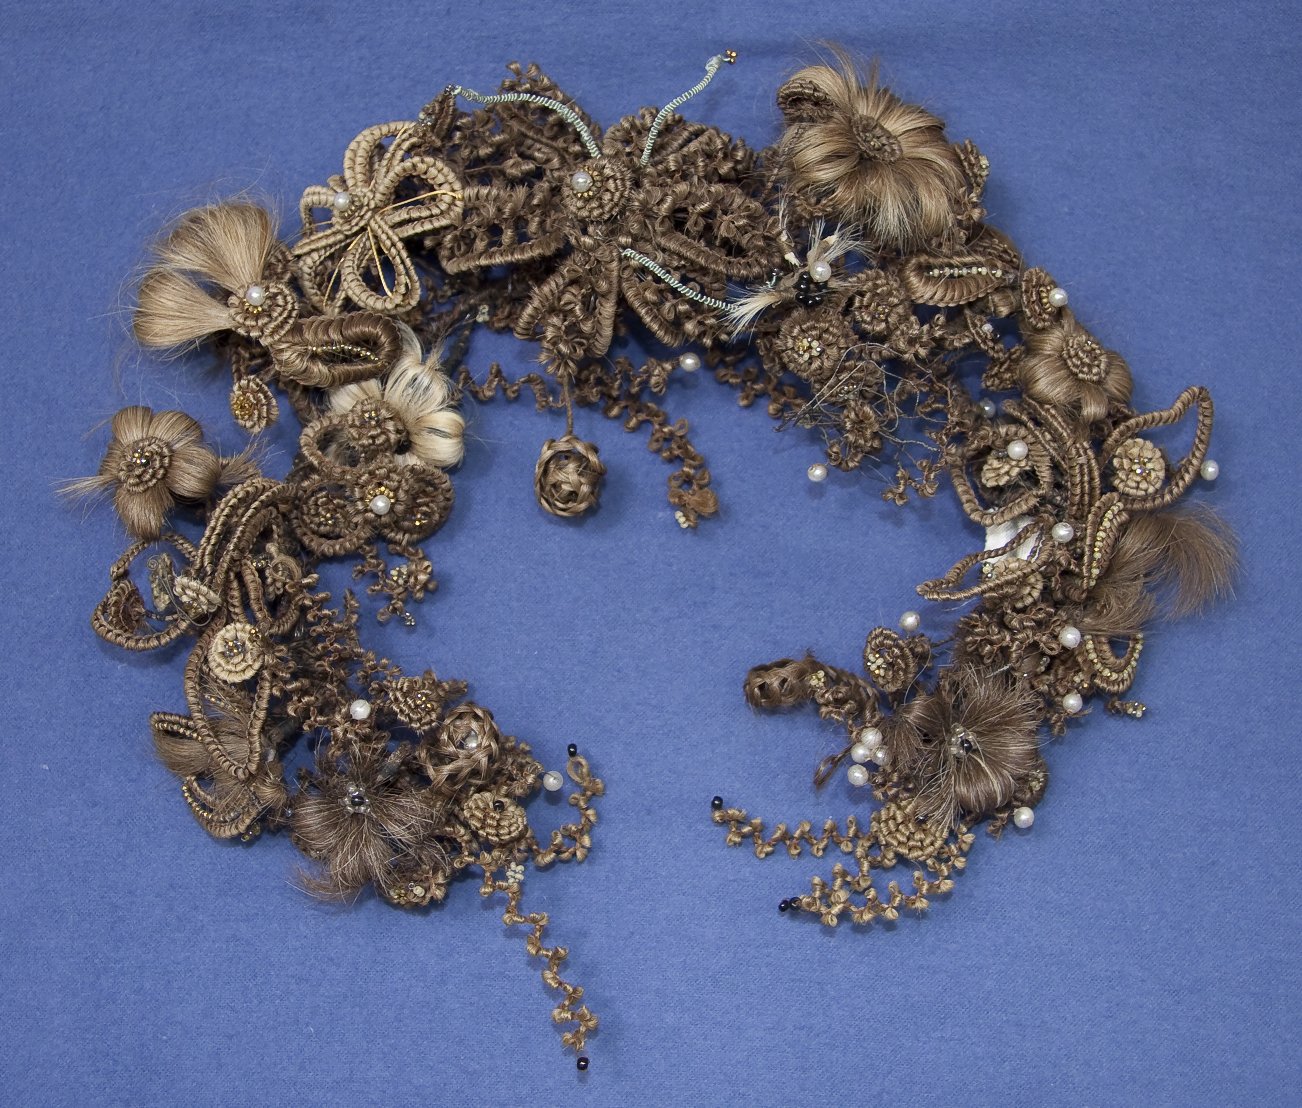 Hair wreath, North America 1850-1869, Helen Louise Allen Textile Collection at the University of Wisconsin-Madison